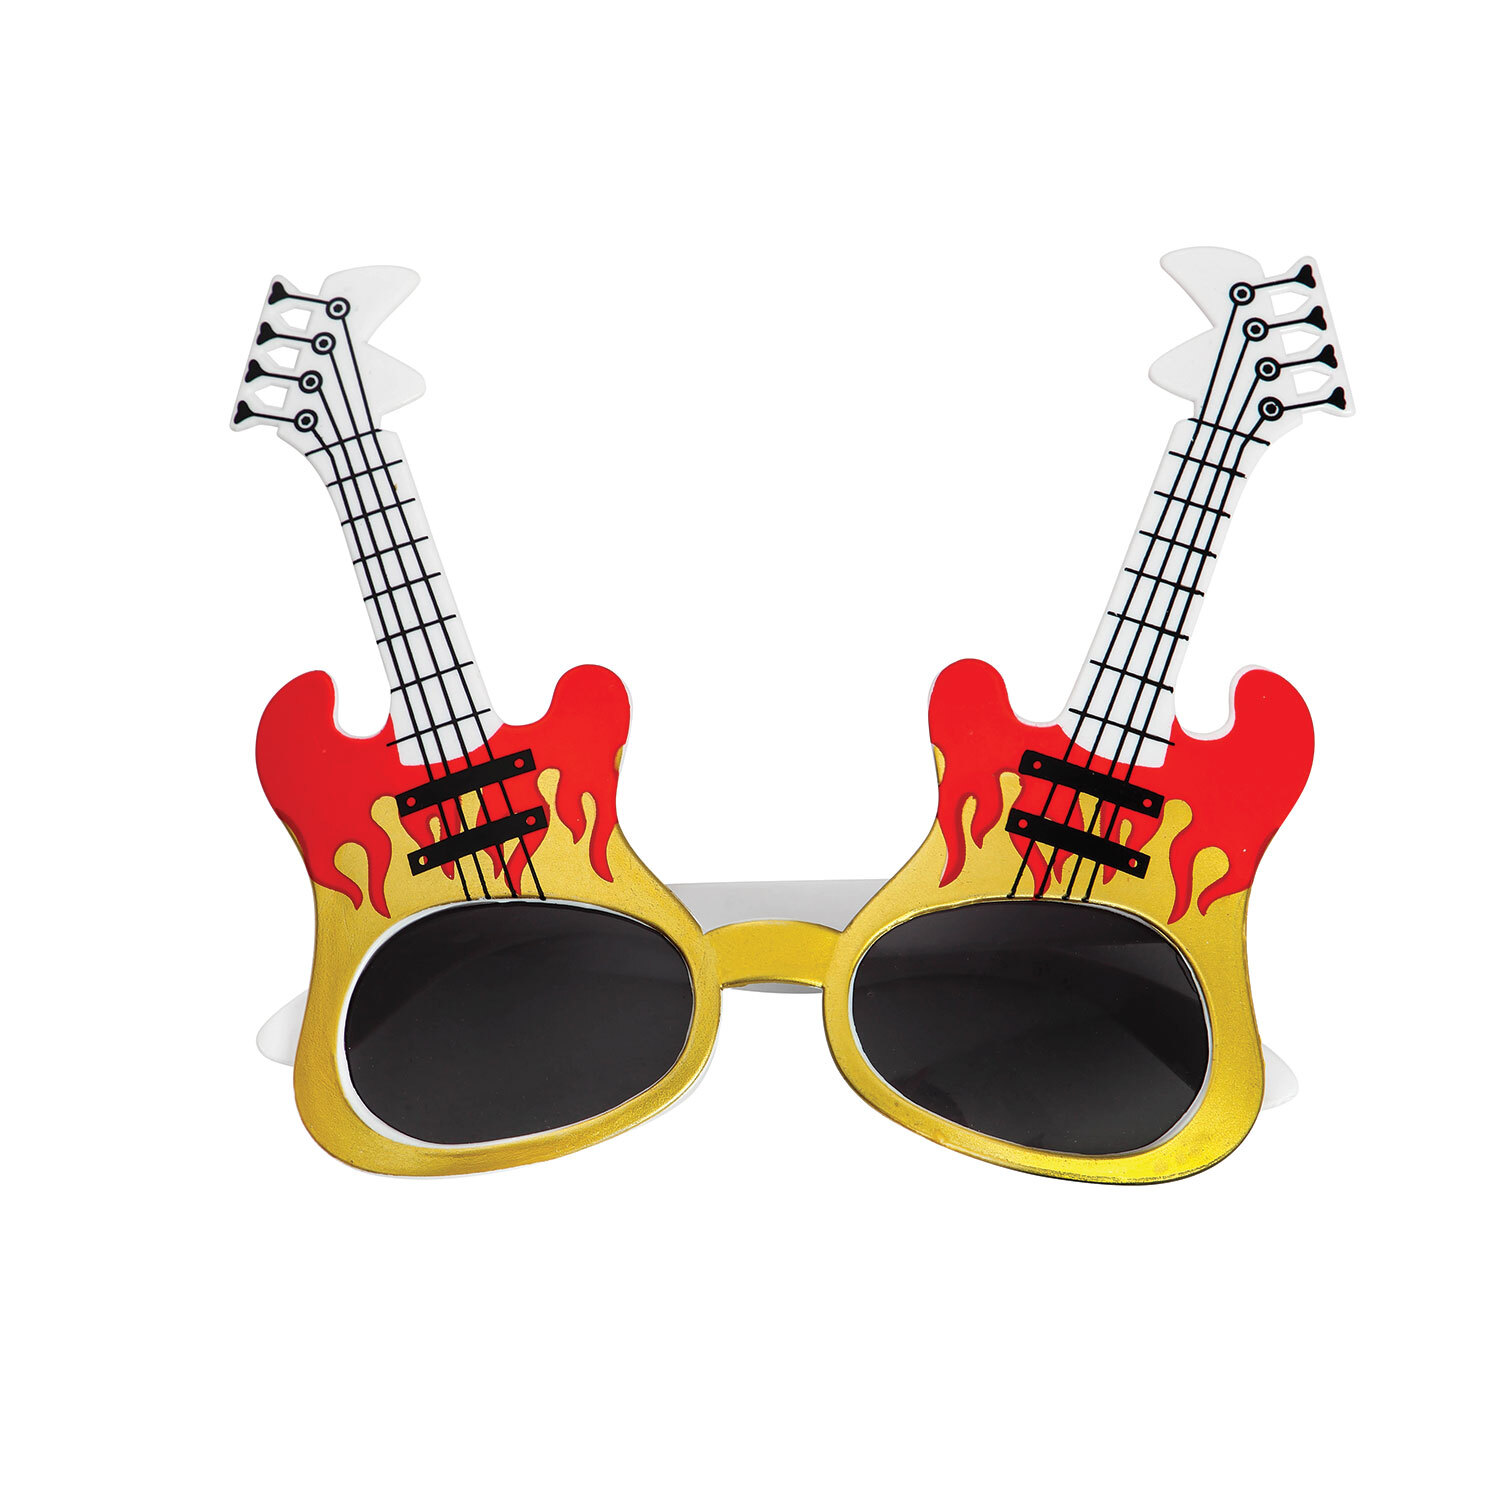 Guitar Party Novelty Glasses Image